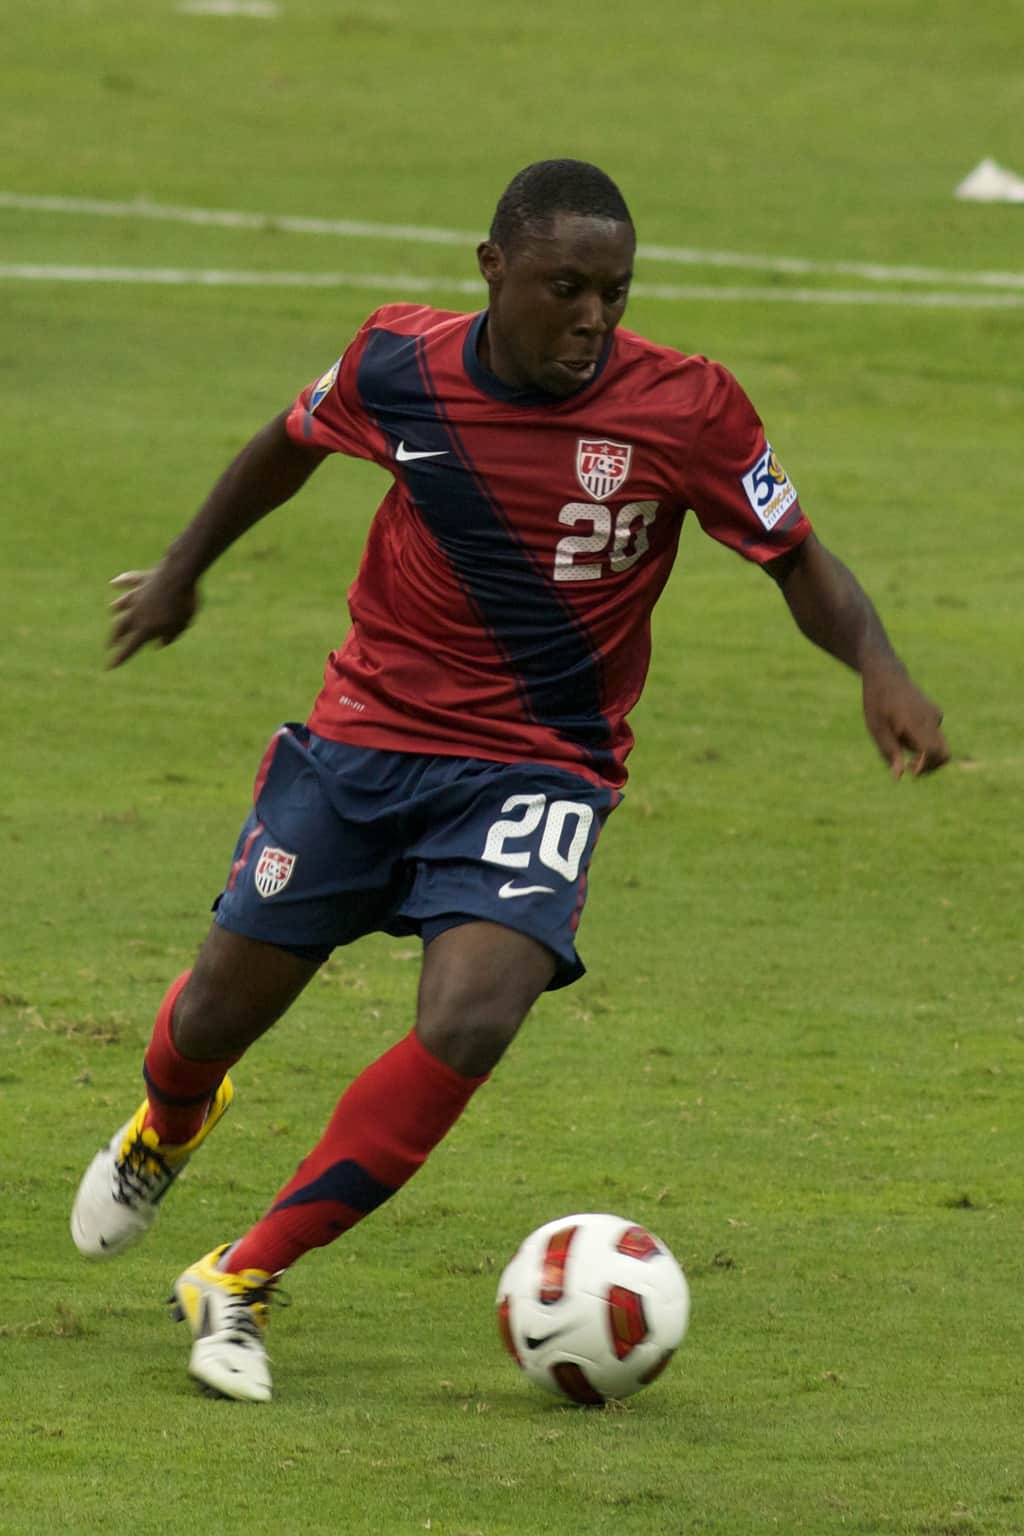 The Next Pelé: What on Earth happened to Freddy Adu?